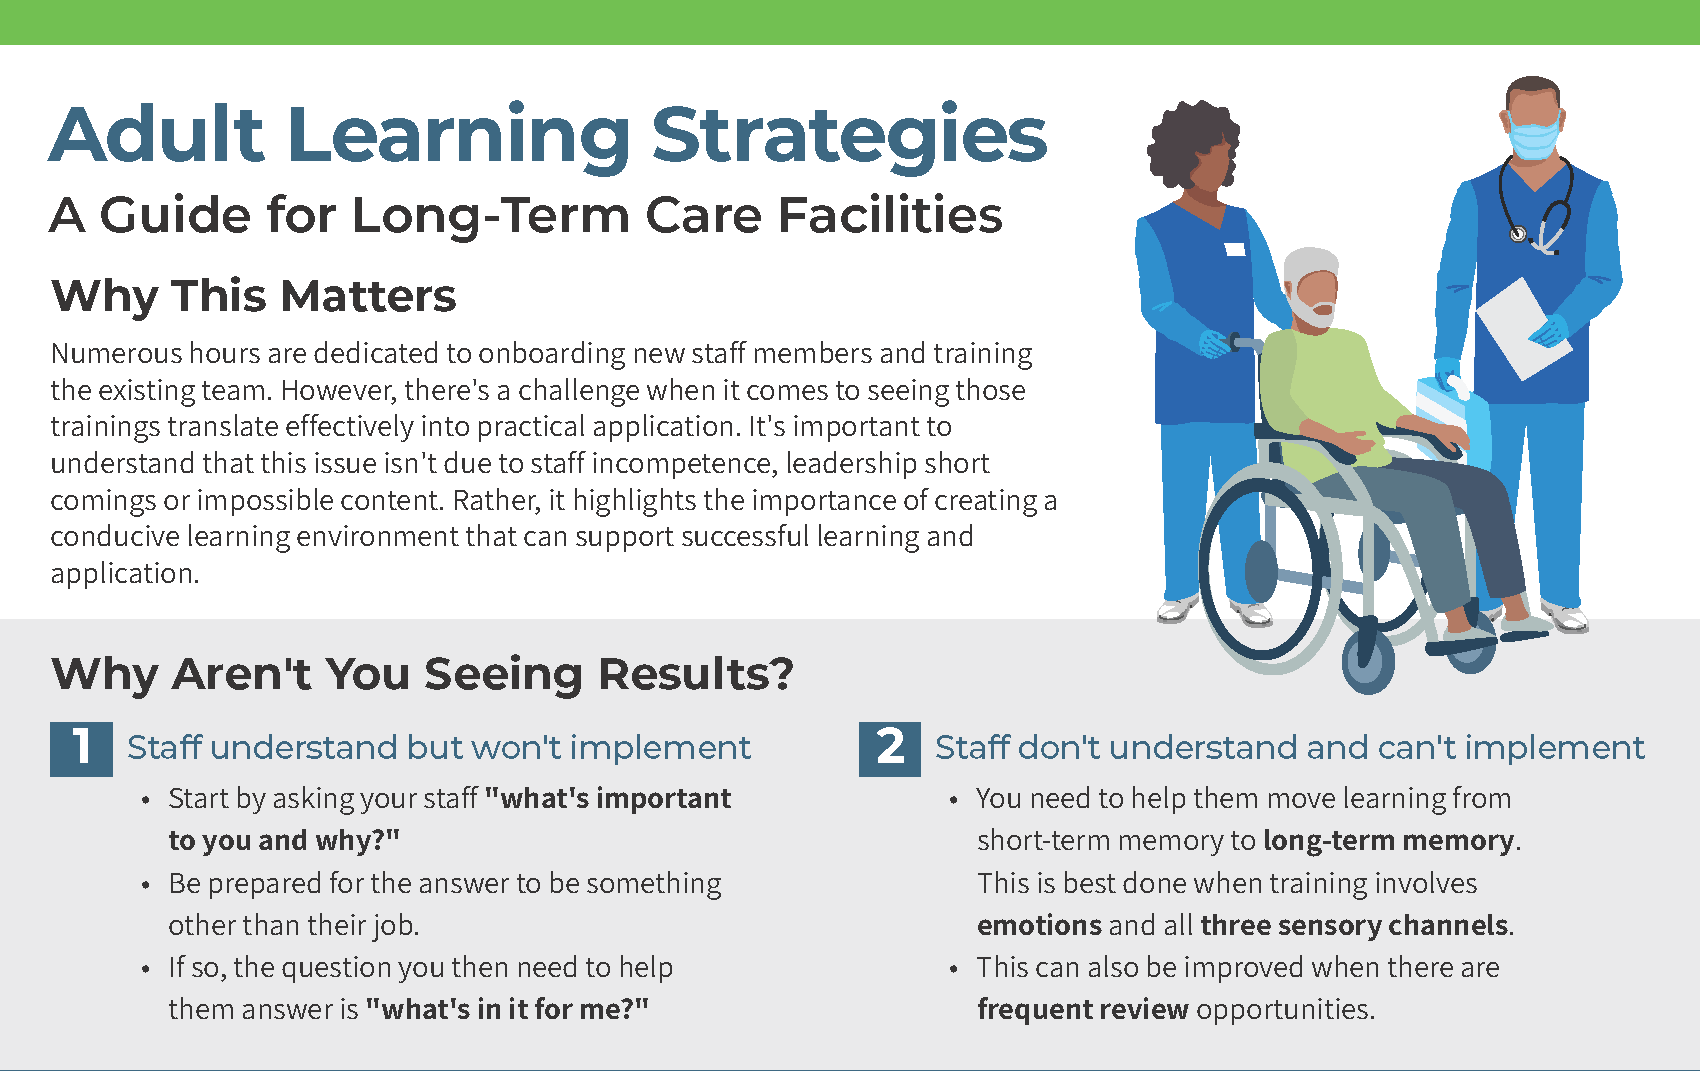 Screenshot of Adult Learning Strategies for Long-Term Care Facilities